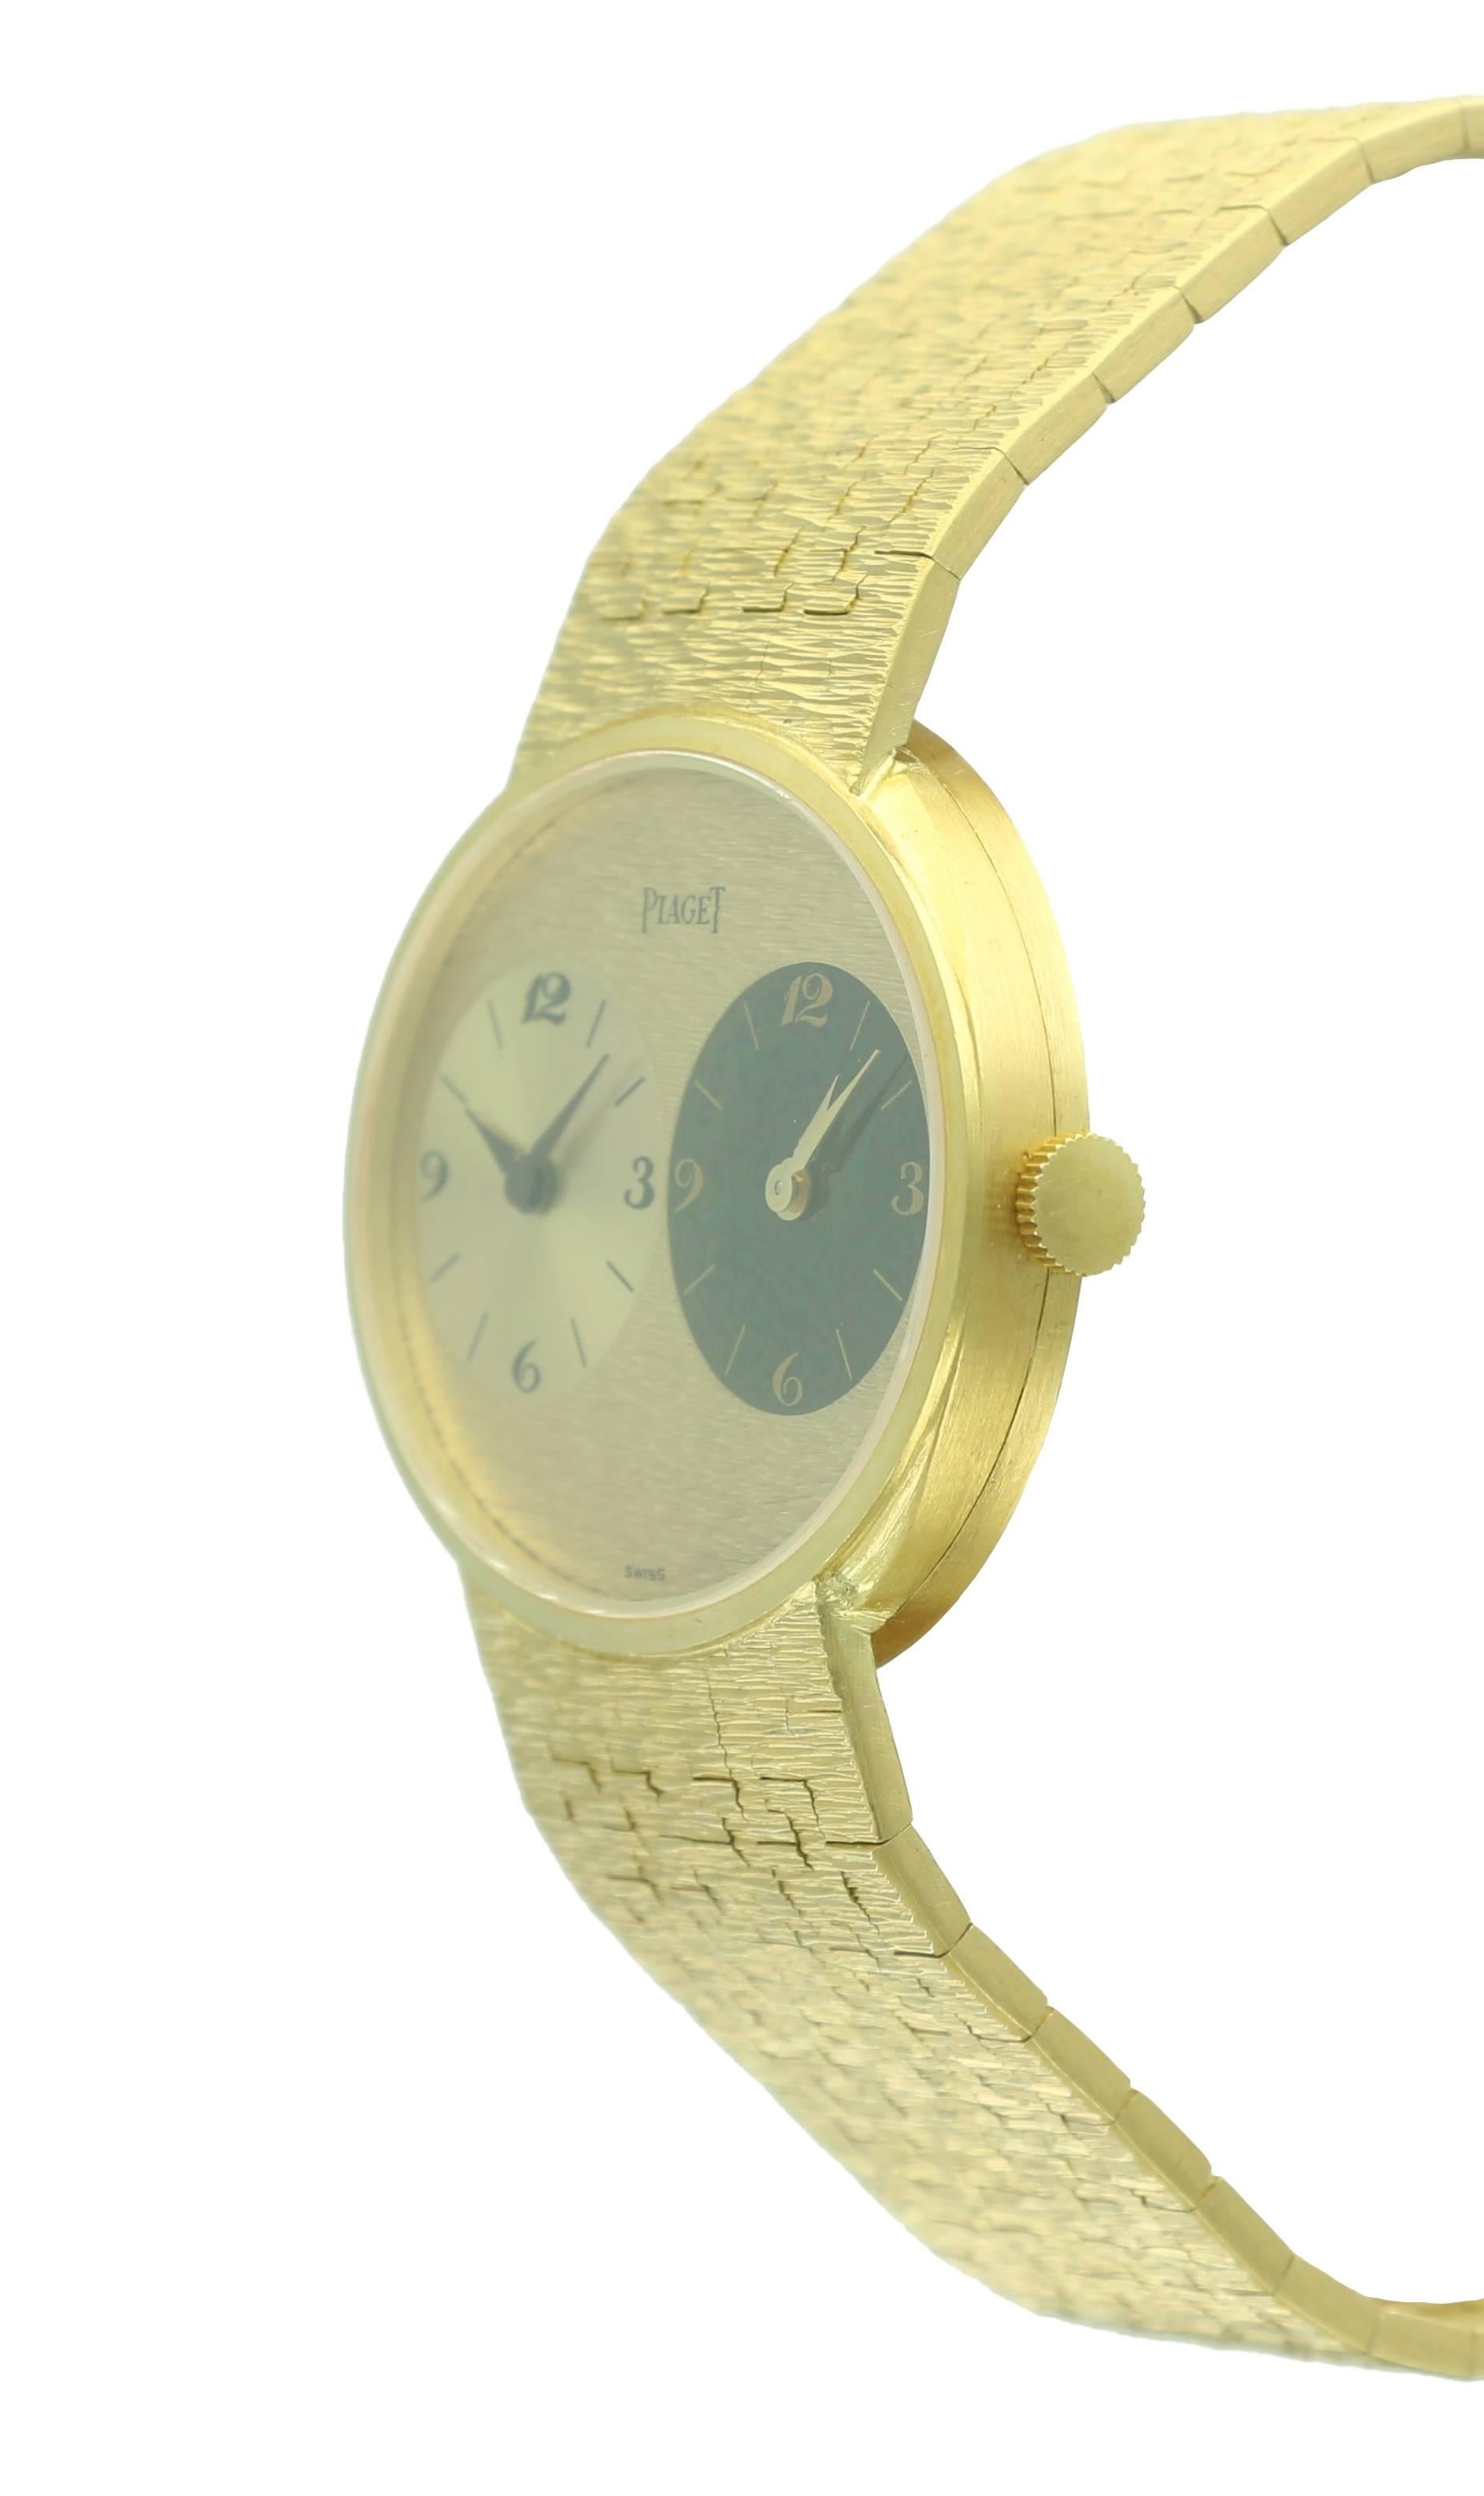 Piaget Yellow Gold Dual-Time Wristwatch Ref 612501 In Excellent Condition For Sale In Beverly Hills, CA